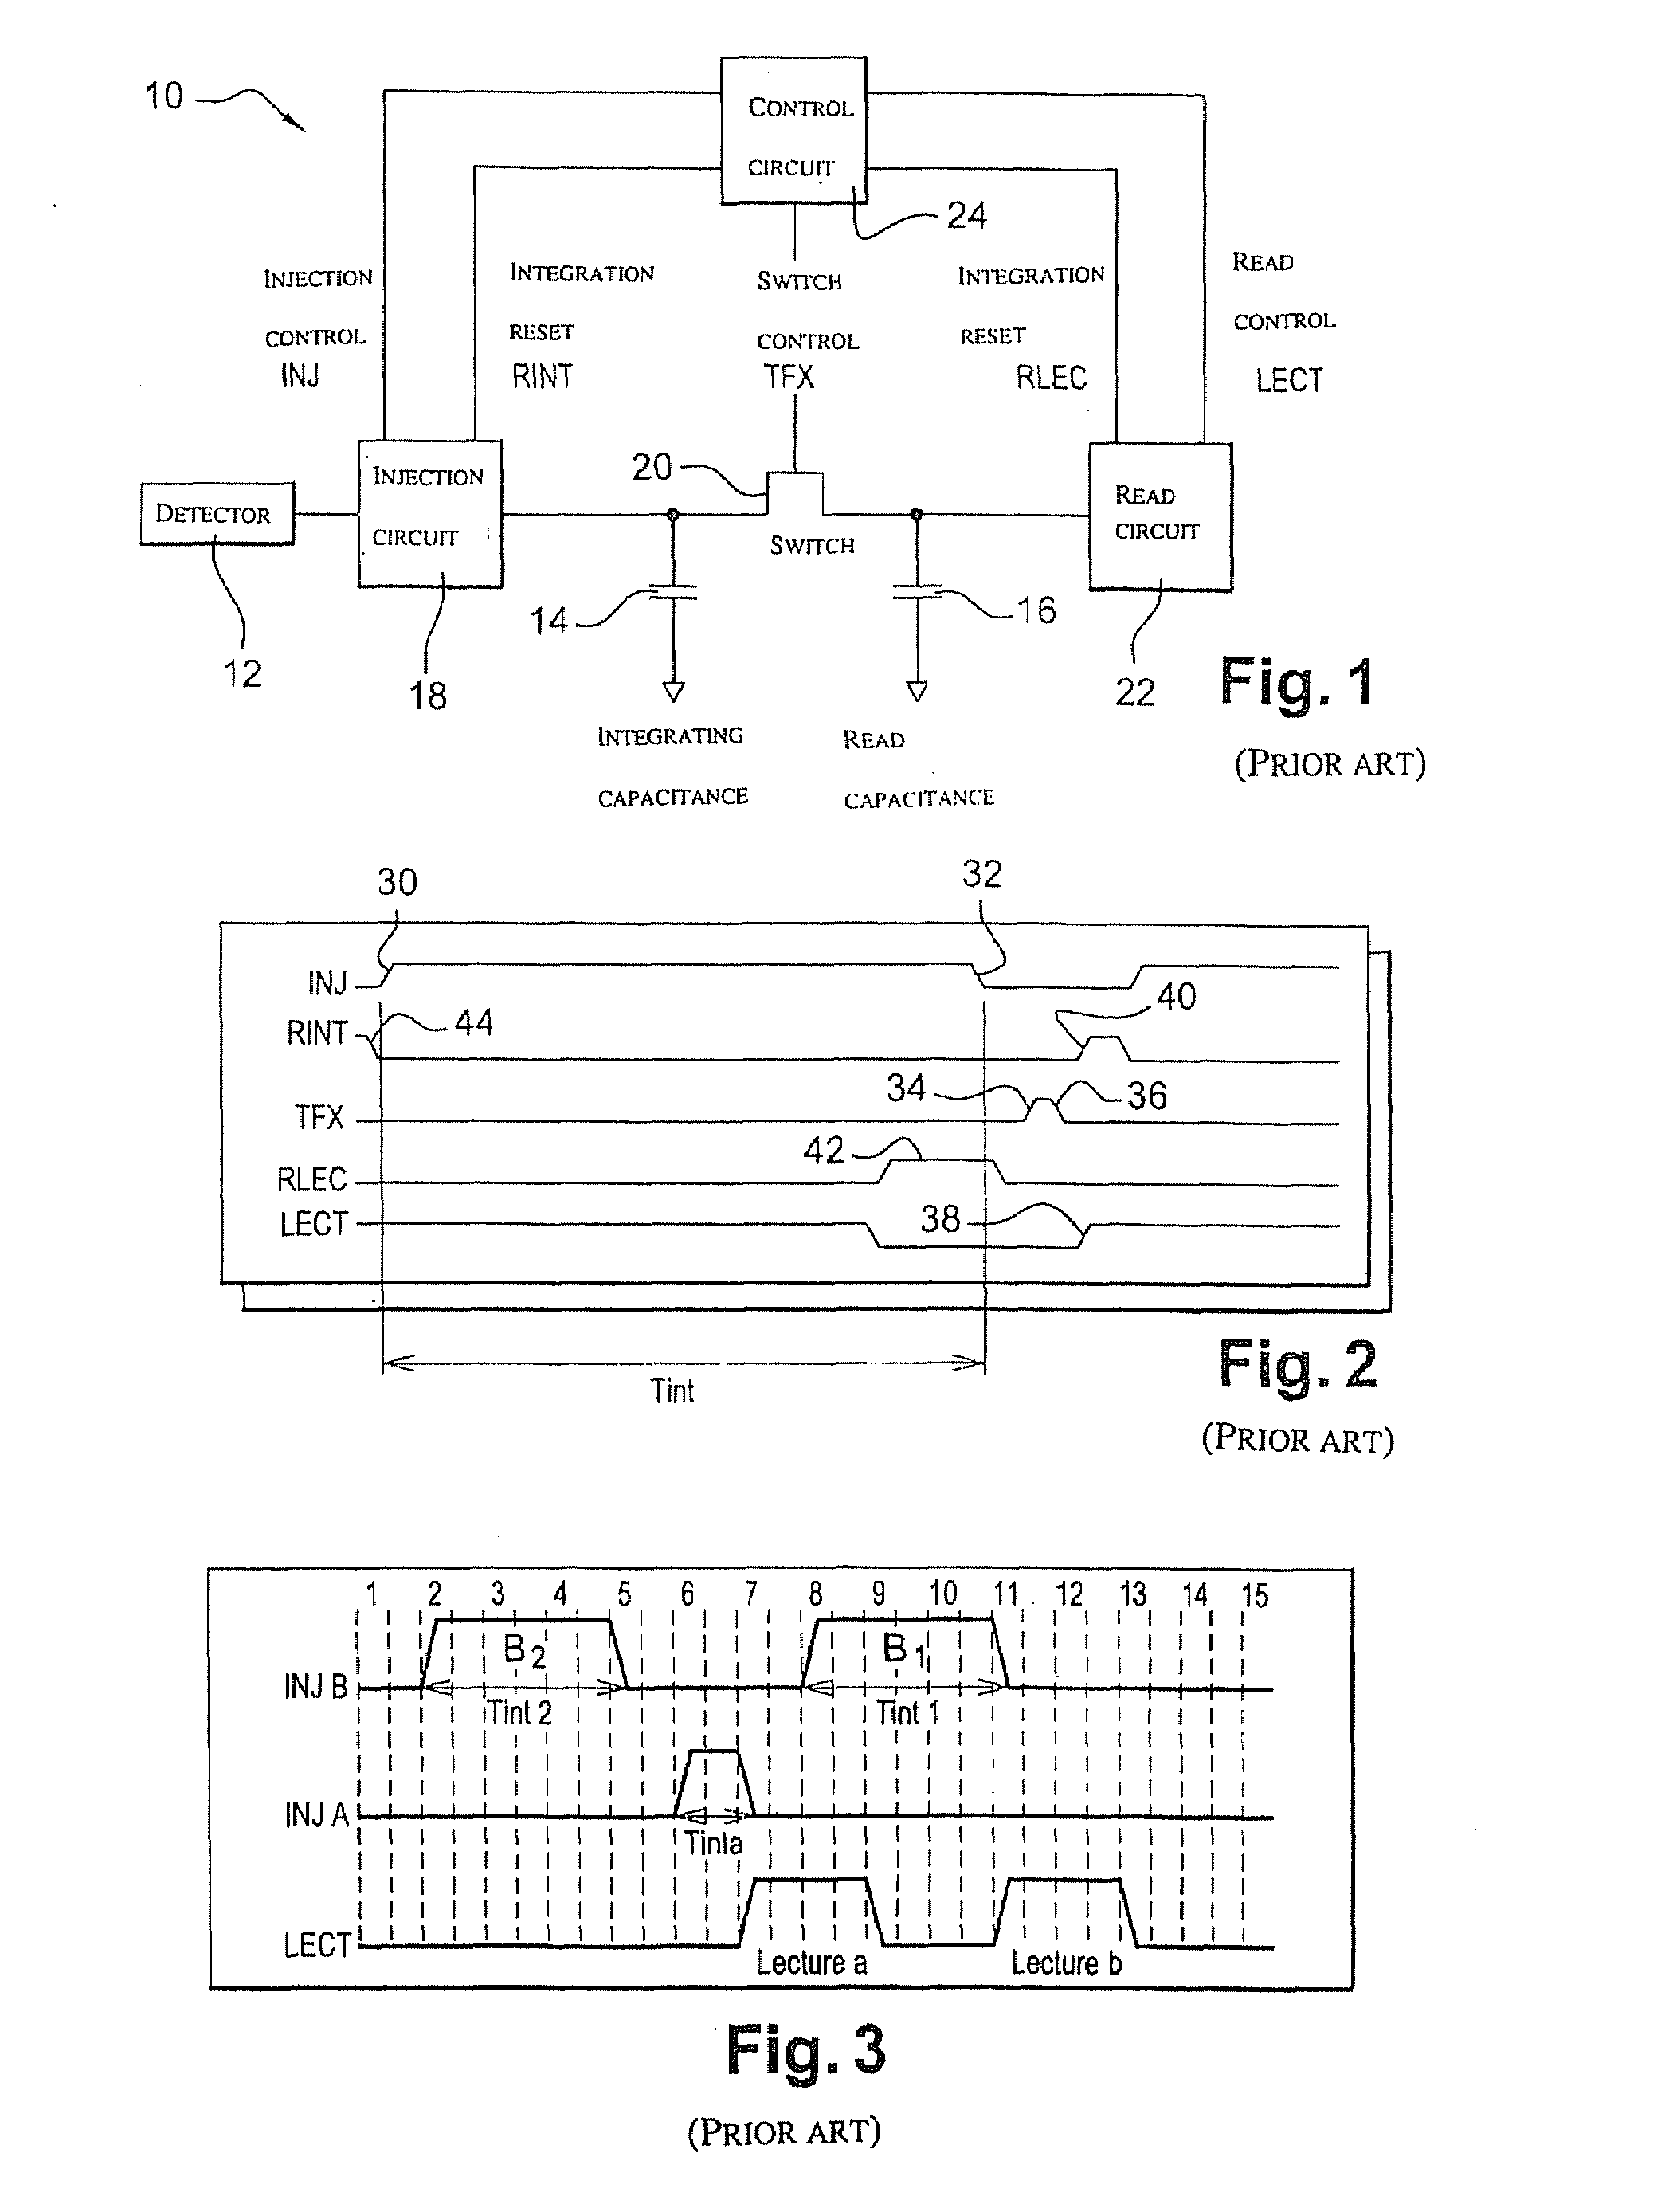 Method and device for reading electrical charges produced by a photo-detector, and detector comprising such devices